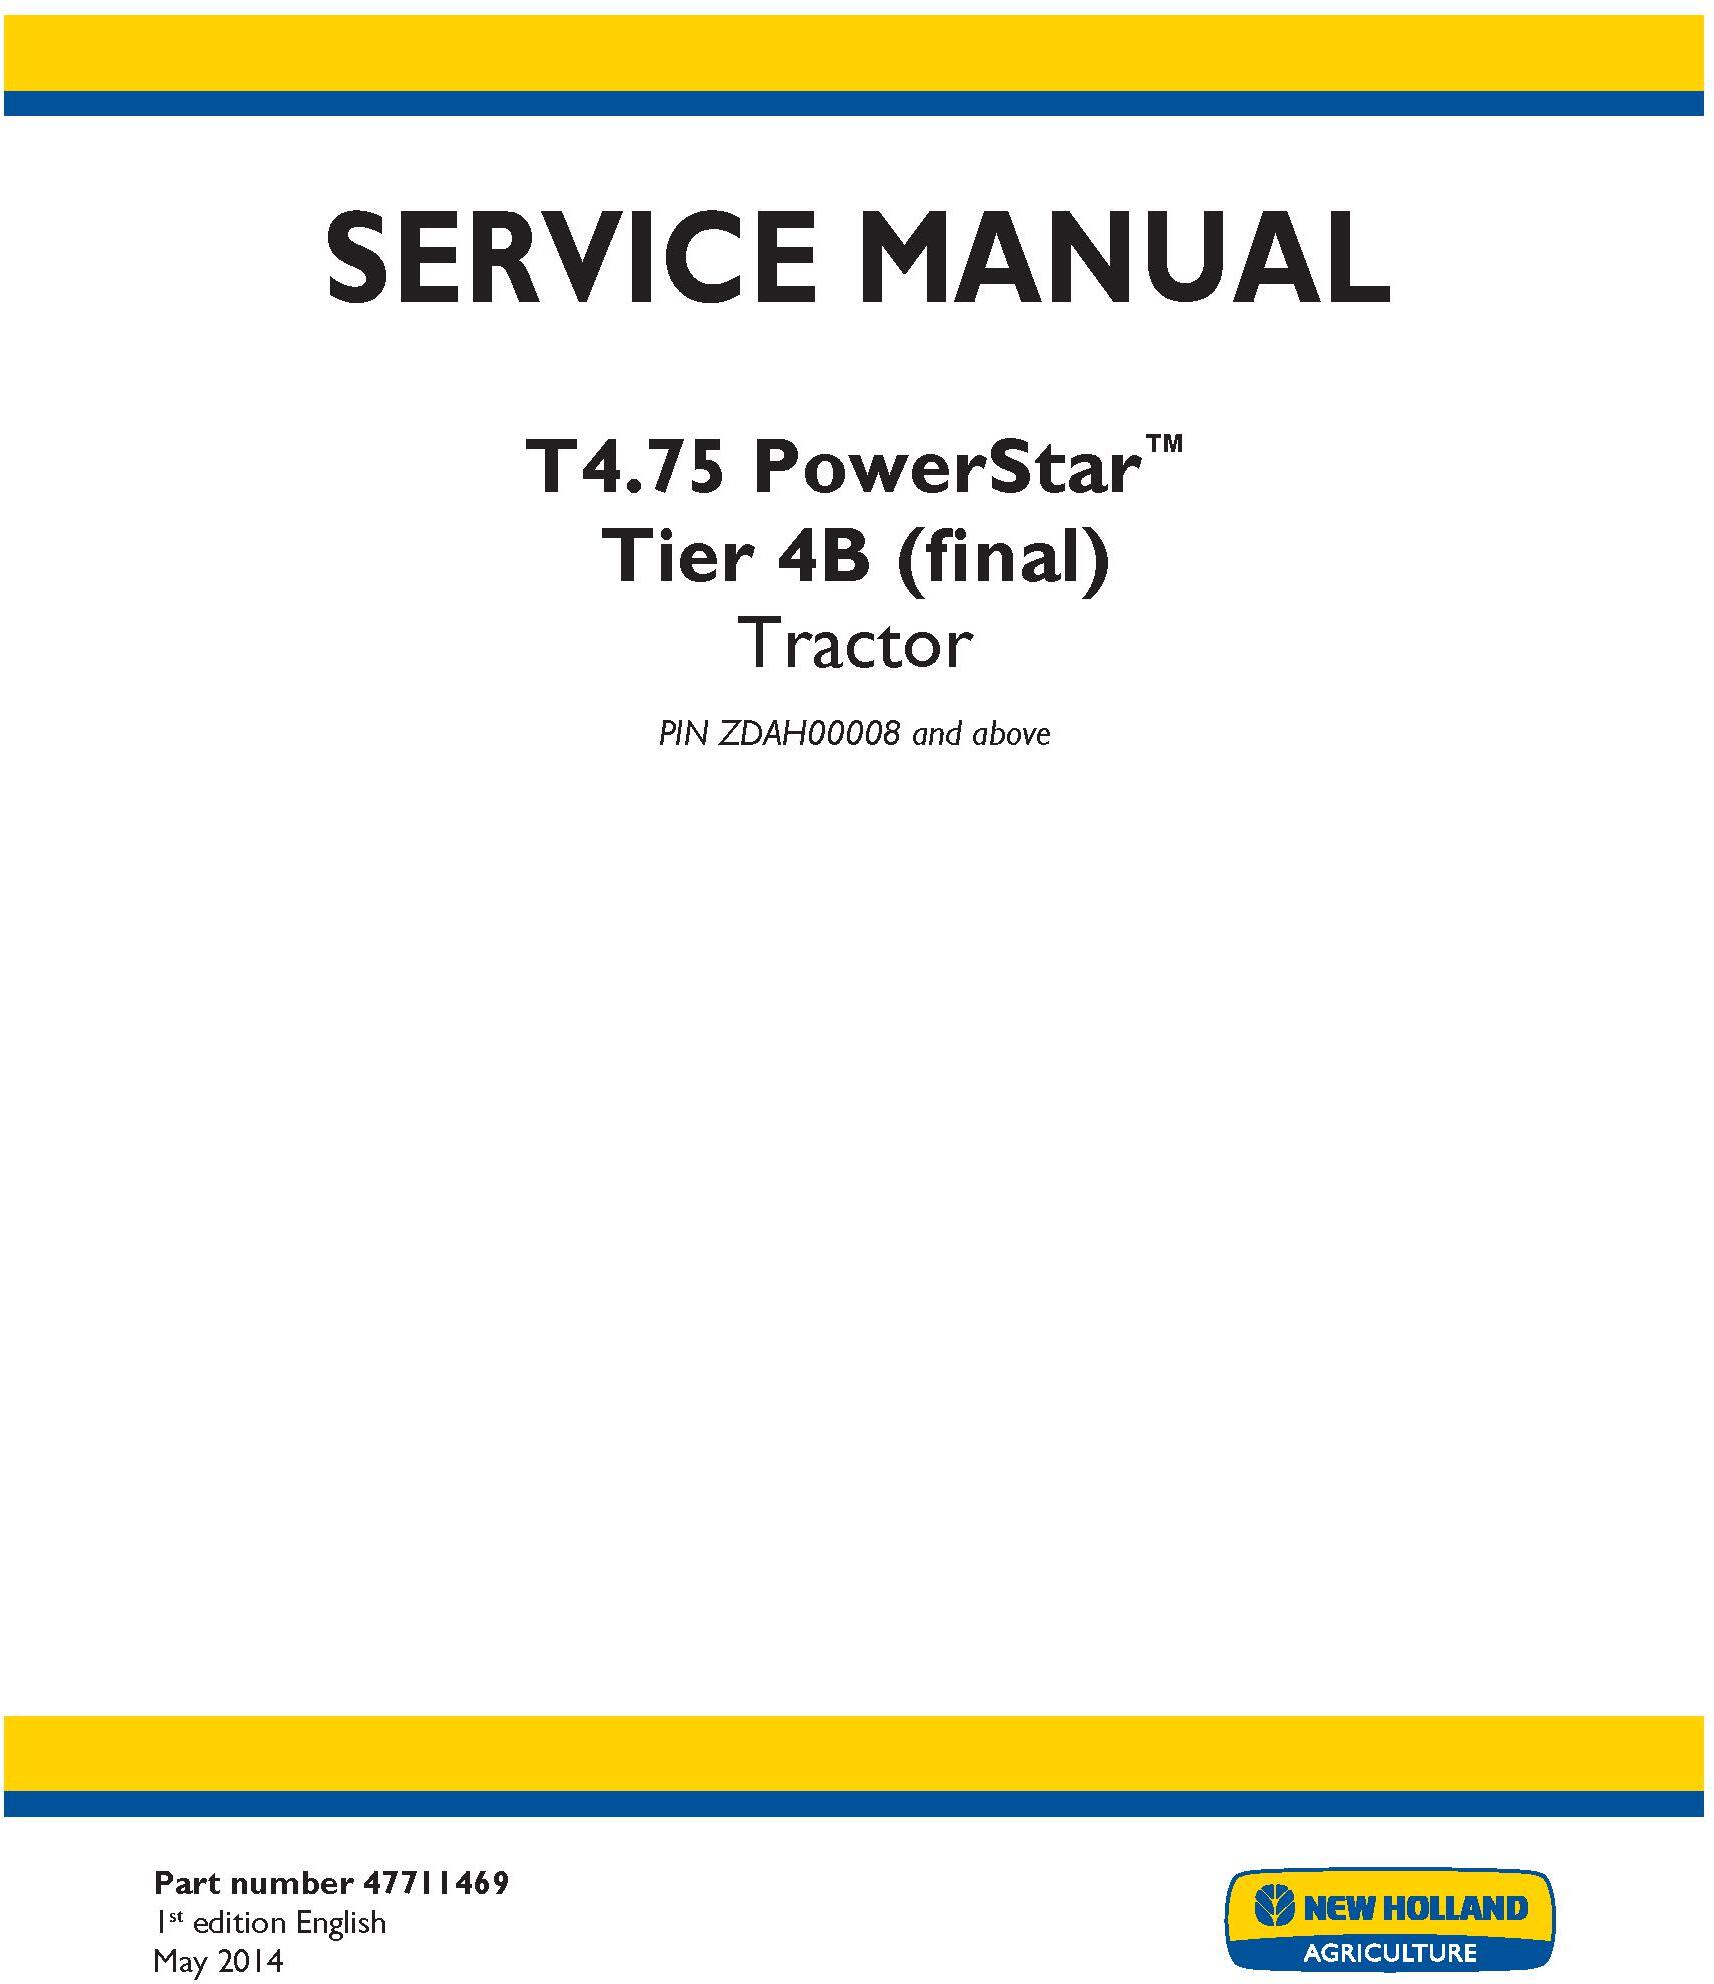 New Holland T4.75 POWERSTAR TIER 4B (FINAL) TRACTOR Complete Service Manual